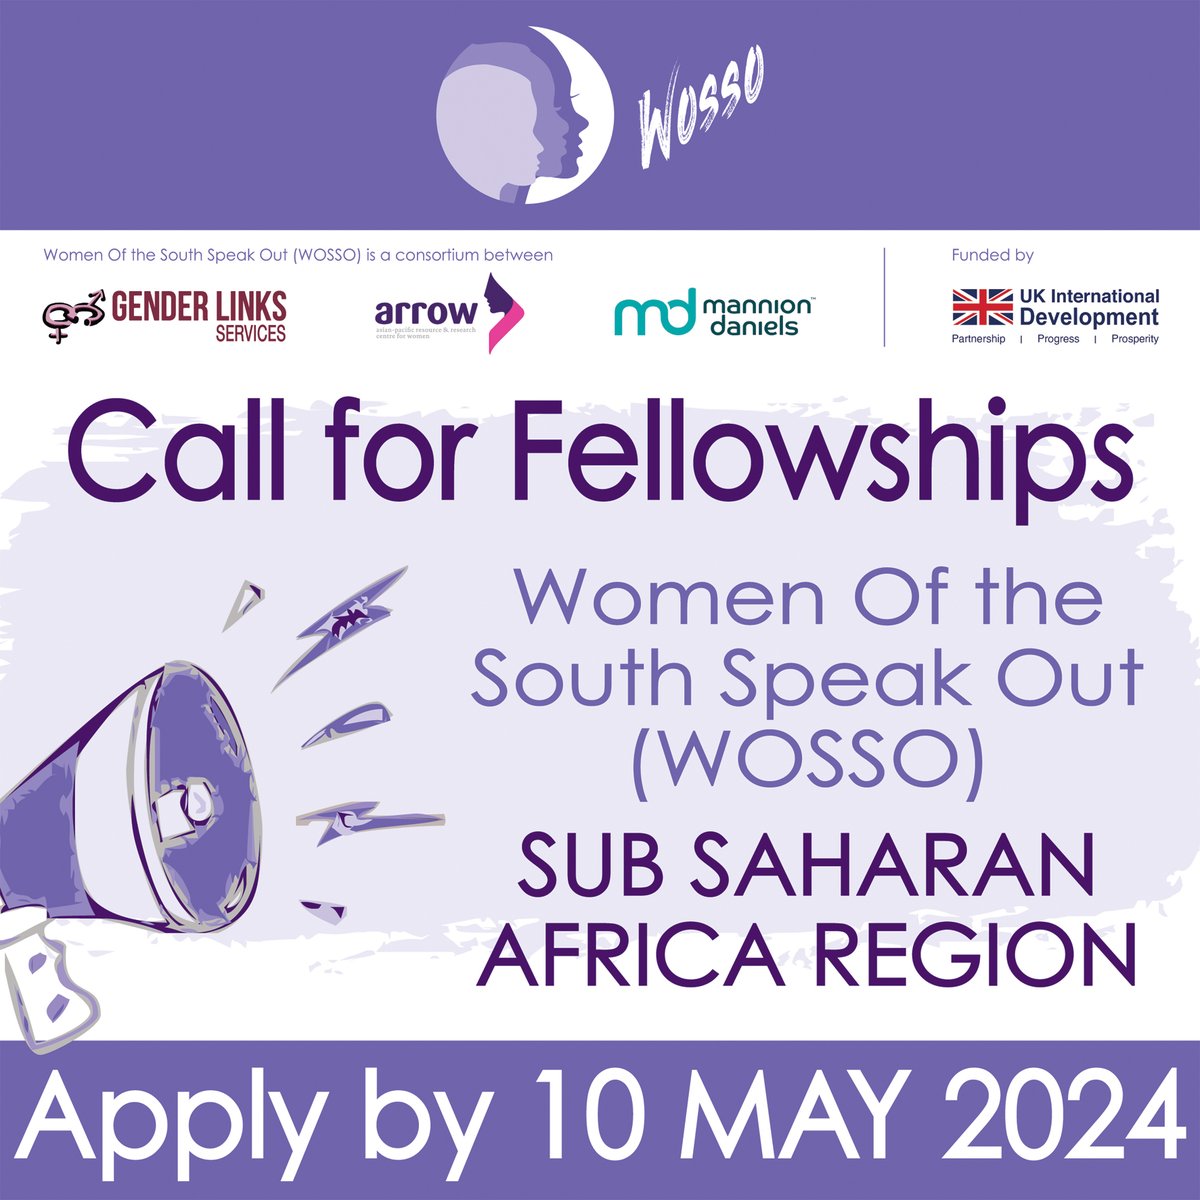 Are you passionate about women's rights and aged 18-35 years? Are you linked to a women's rights organisation or network in Sub-Saharan Africa? If yes, then click the link to apply by midnight 10 May 2024 South African Standard Time (SAST). wosso.grantplatform.com